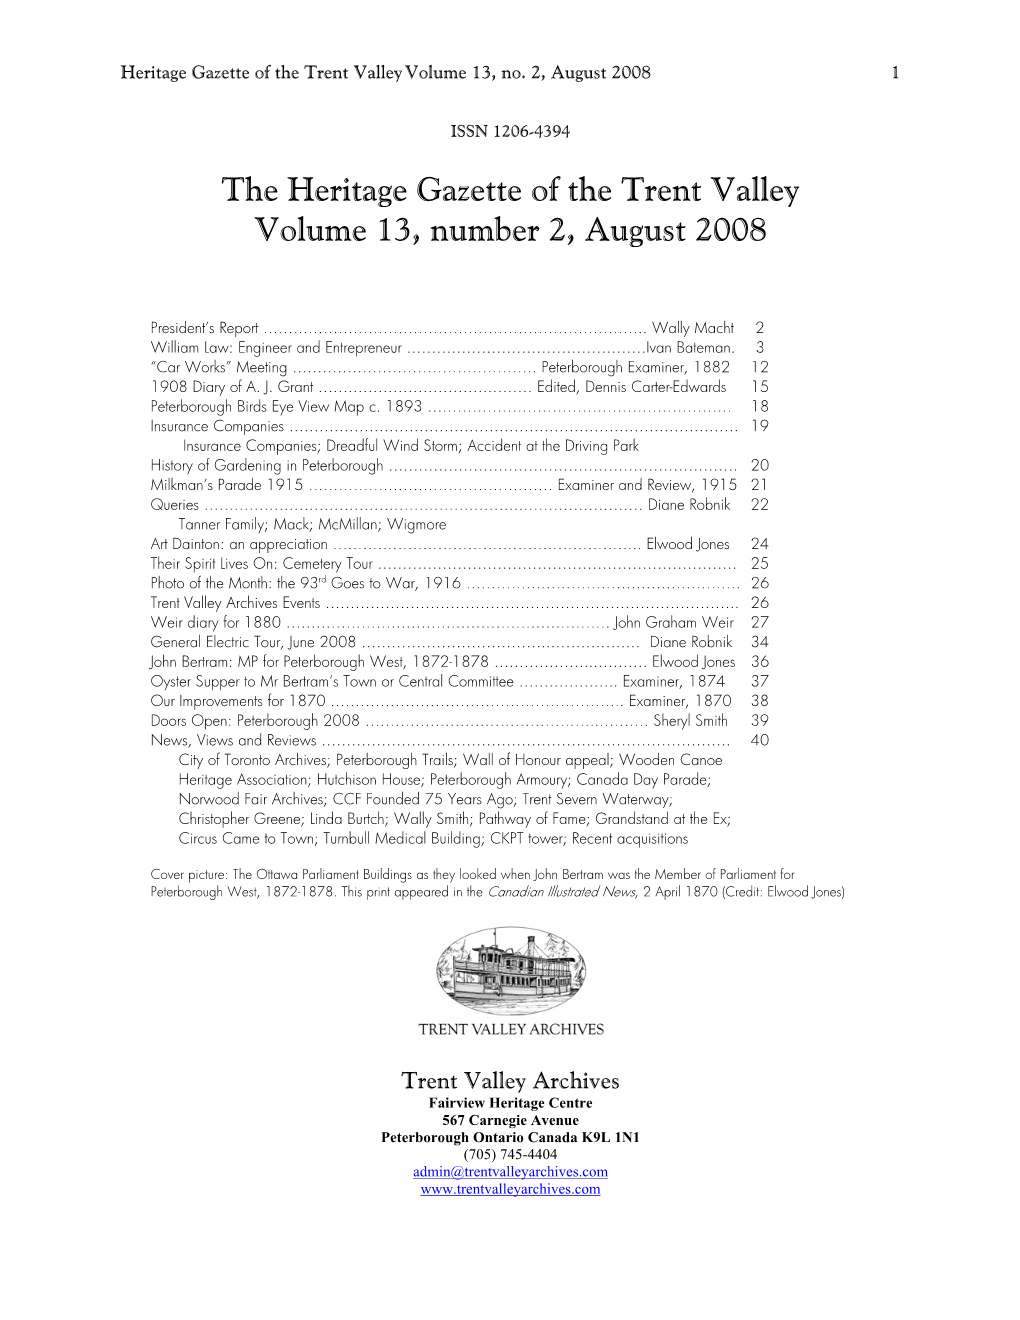 The Heritage Gazette of the Trent Valley Volume 13, Number 2, August 2008